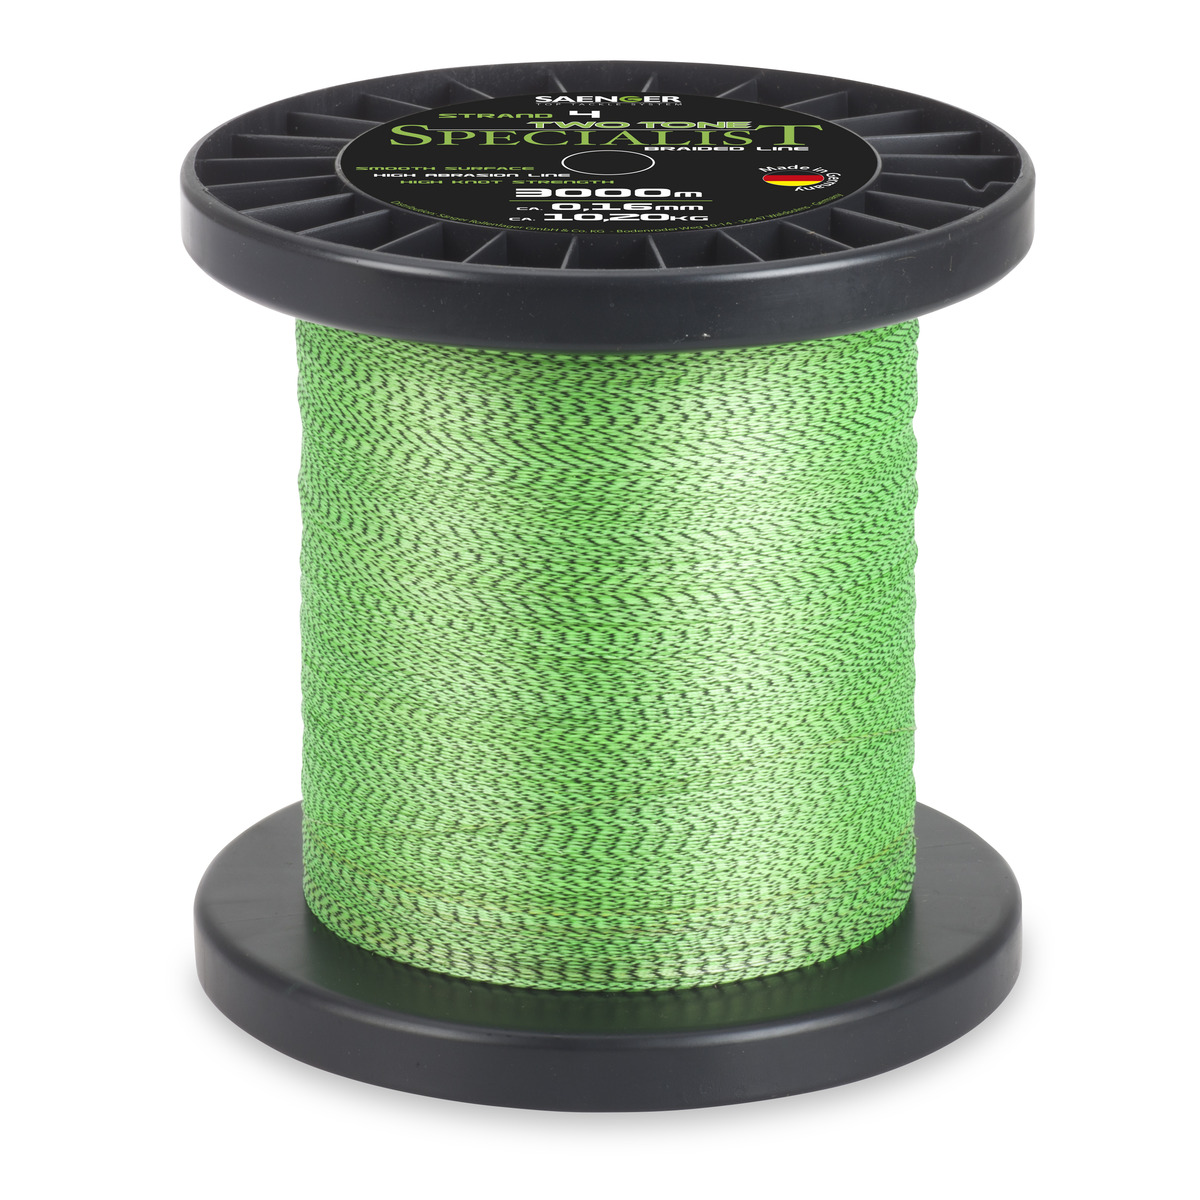 Saenger Specialist Two Tone Fluo Braid - 0,25 mm - 19,9kg 3000 m